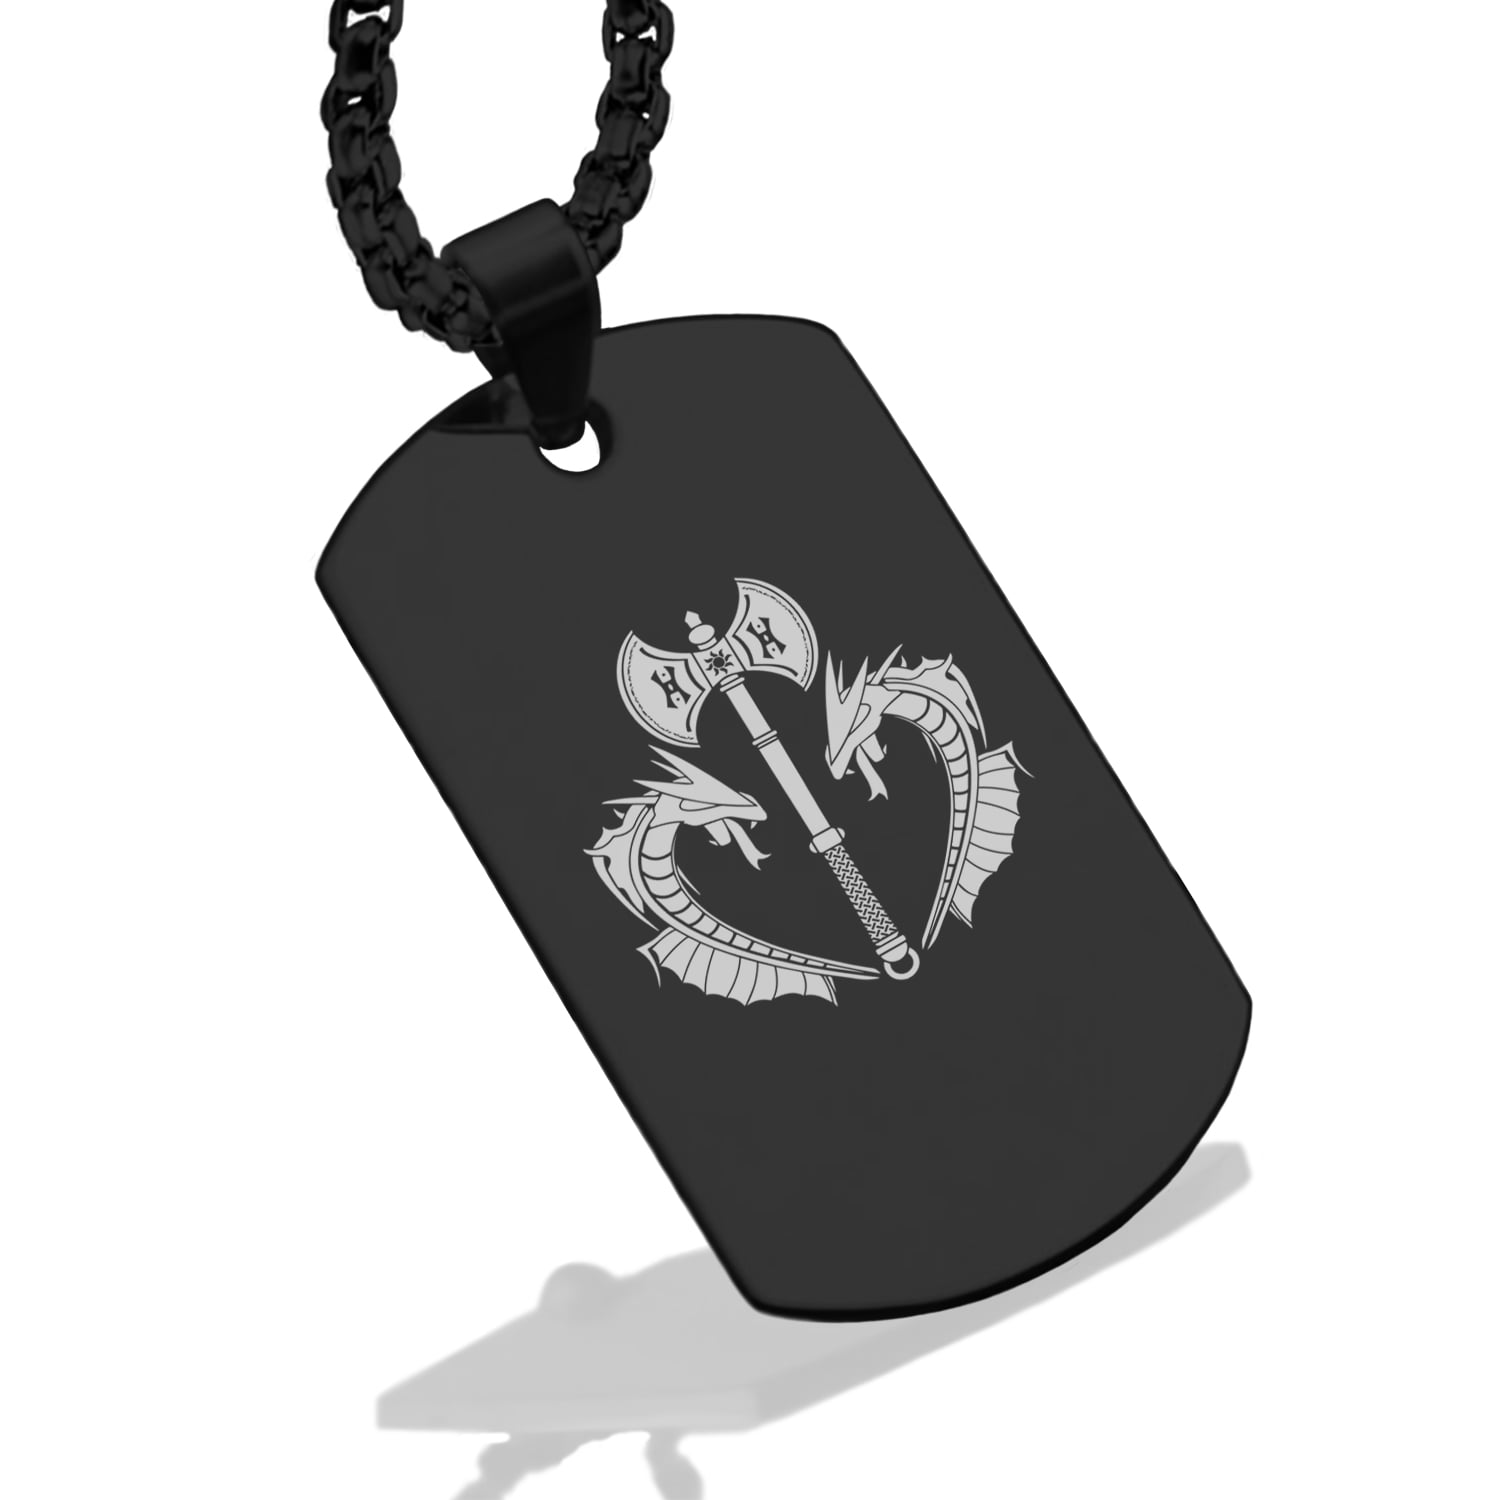 AX Jewelry Mens Stainless Steel Dog Tag Pendant 